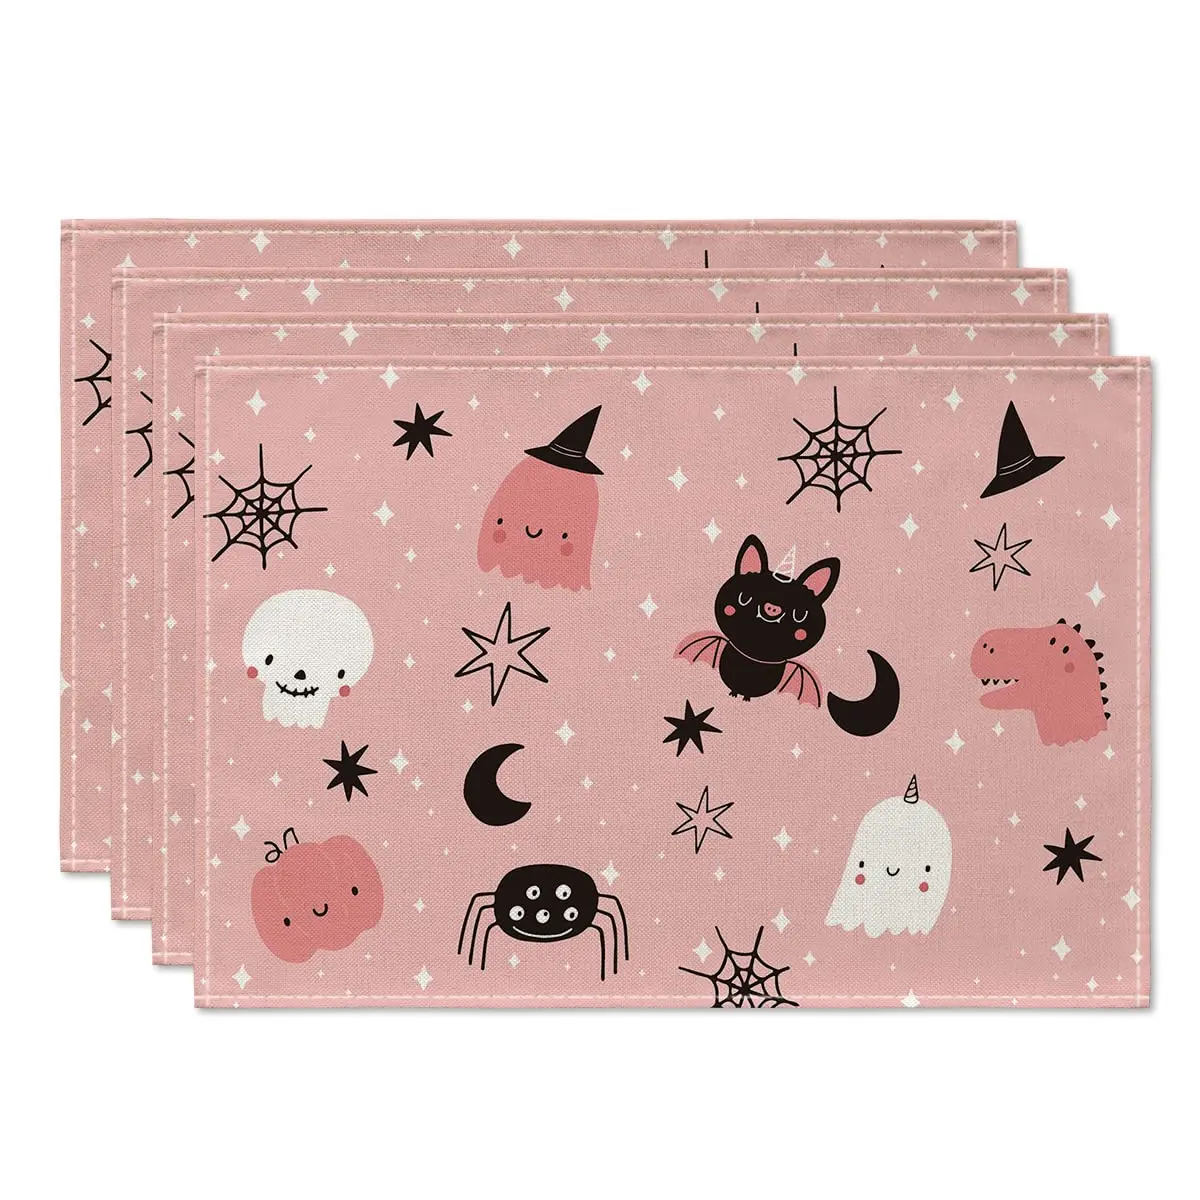 

Halloween Placemats Set of 4,Pink Ghost,Spider Web,Moon,Bat,Spooky,Birthday Table Mats for Party, Dining Decoration, 12x18 Inch